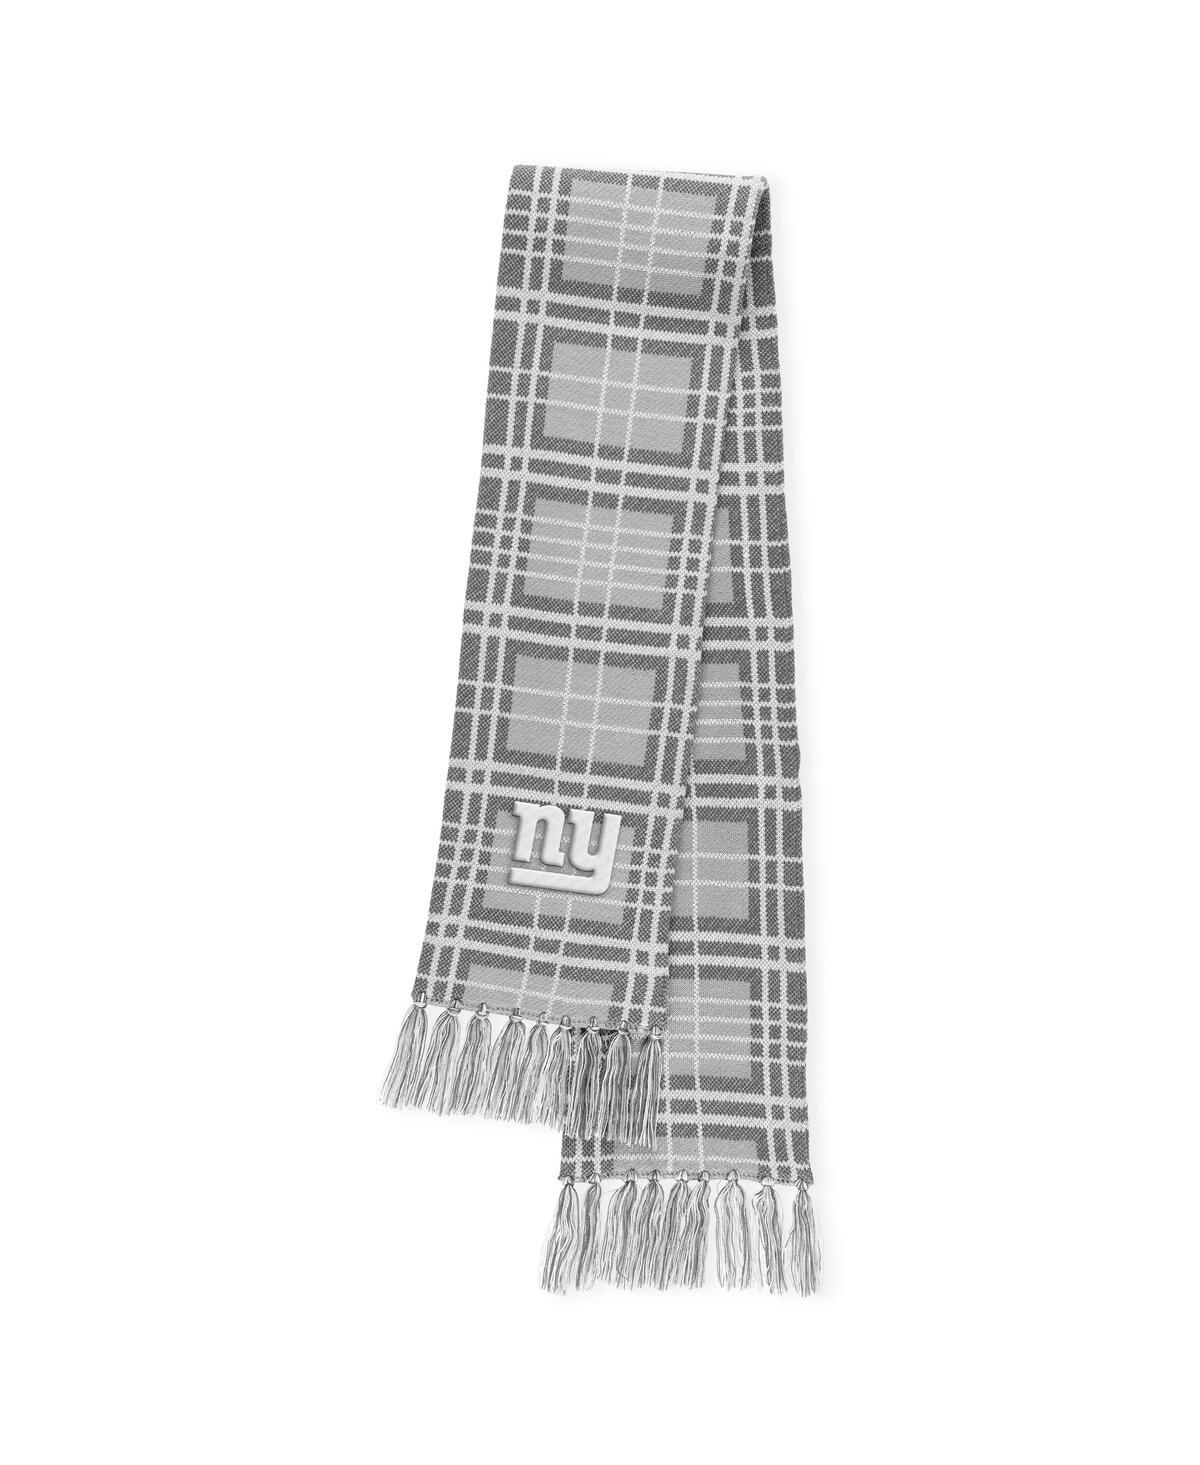 Shop Wear By Erin Andrews Women's  New York Giants Plaid Knit Hat With Pom And Scarf Set In Gray